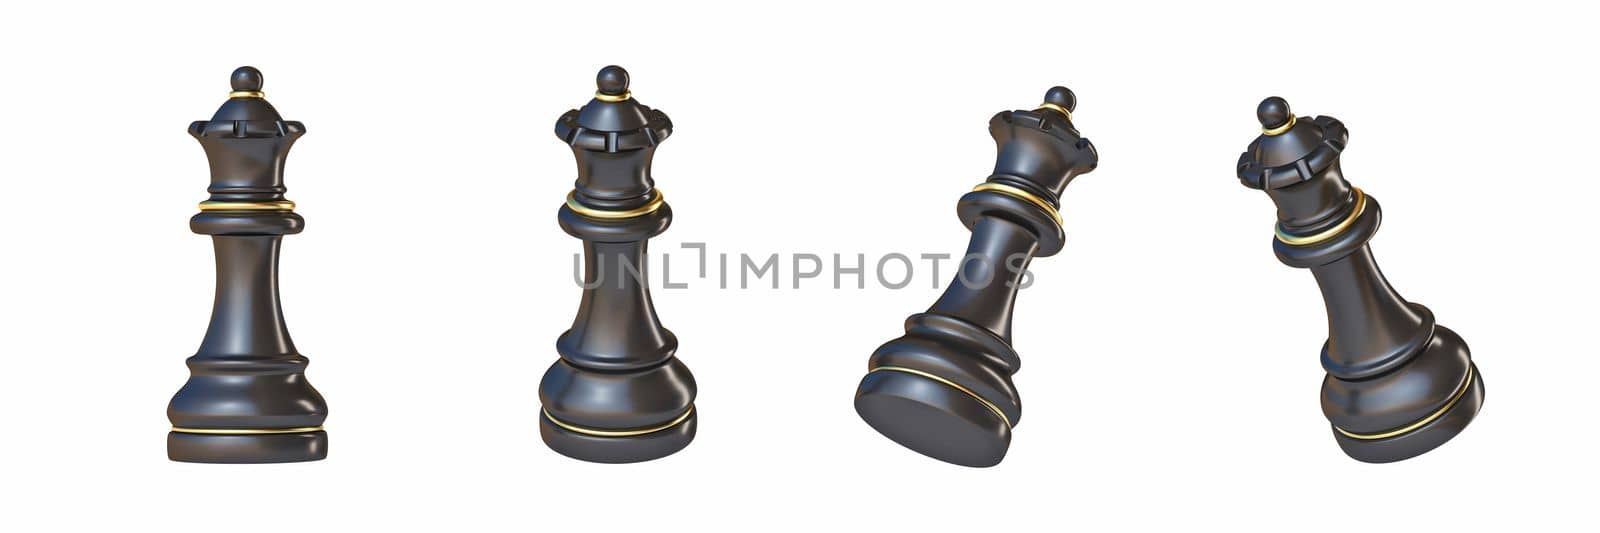 Black chess Queen in four different angled views 3D rendering illustration isolated on white background